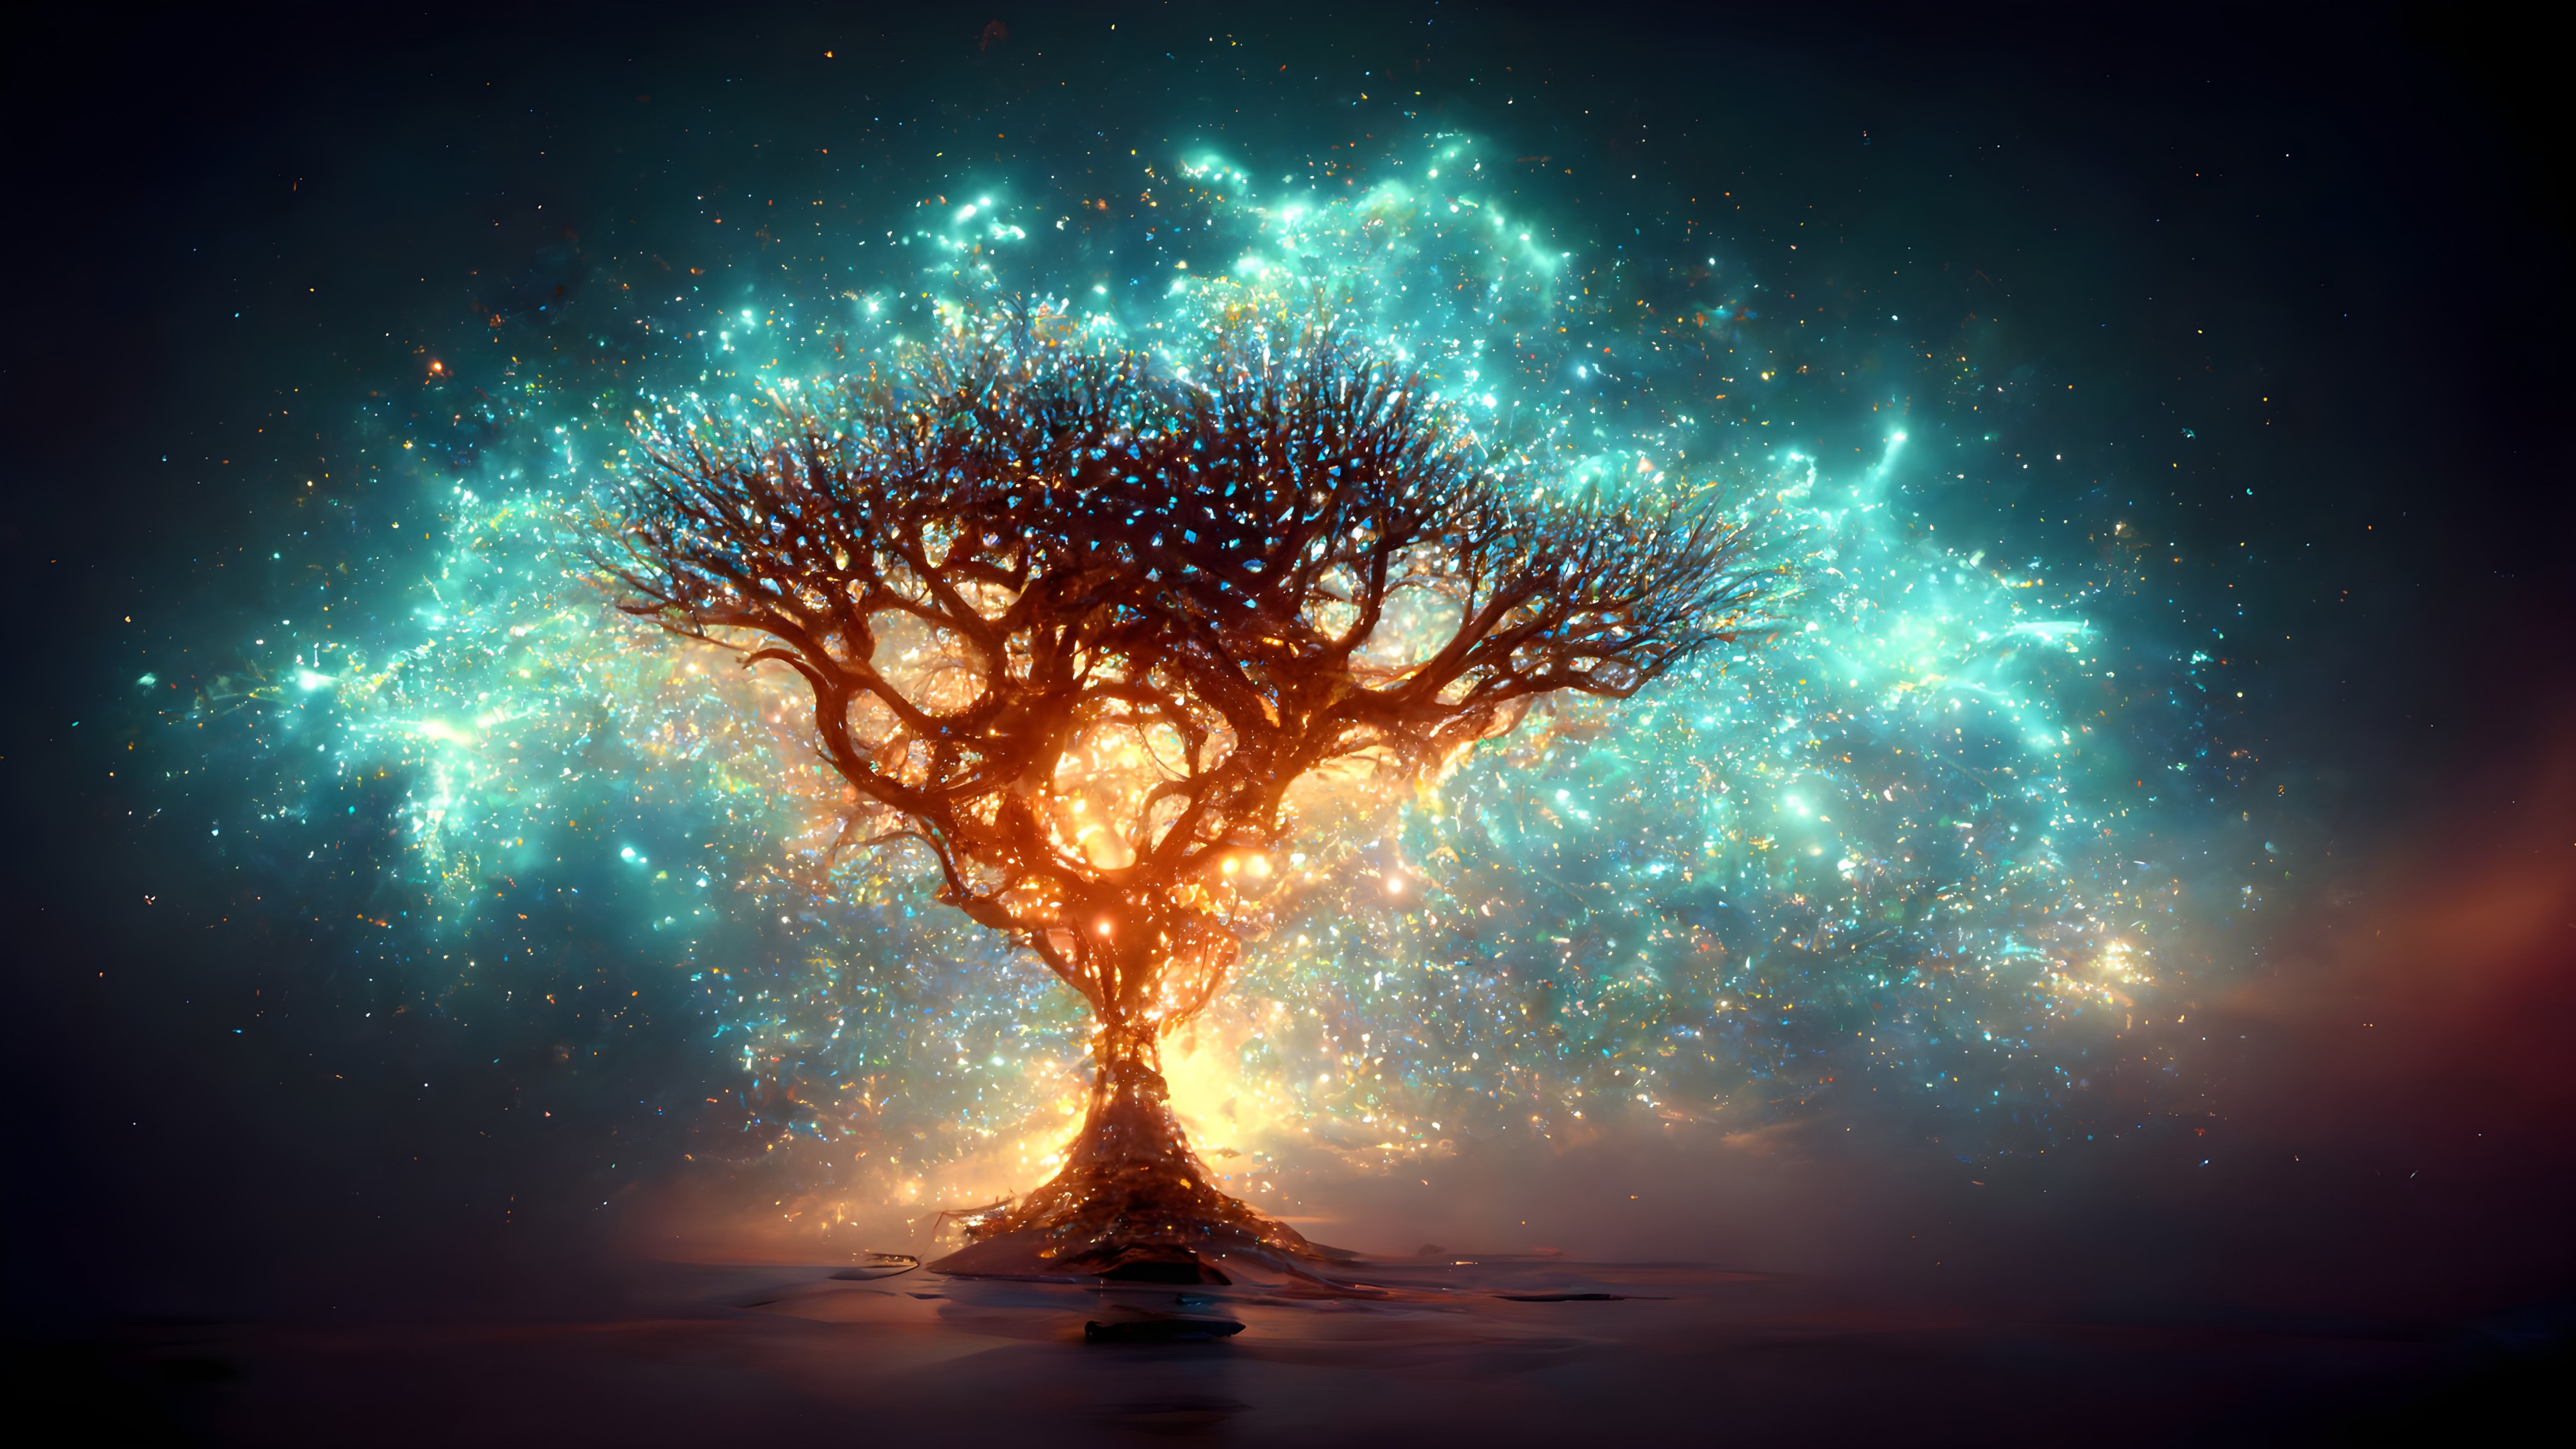 Pandora Journey on Twitter: "picture for today's video 'TREE OF LIFE' made with ai https://t.co/sYmYtNmALU" Twitter